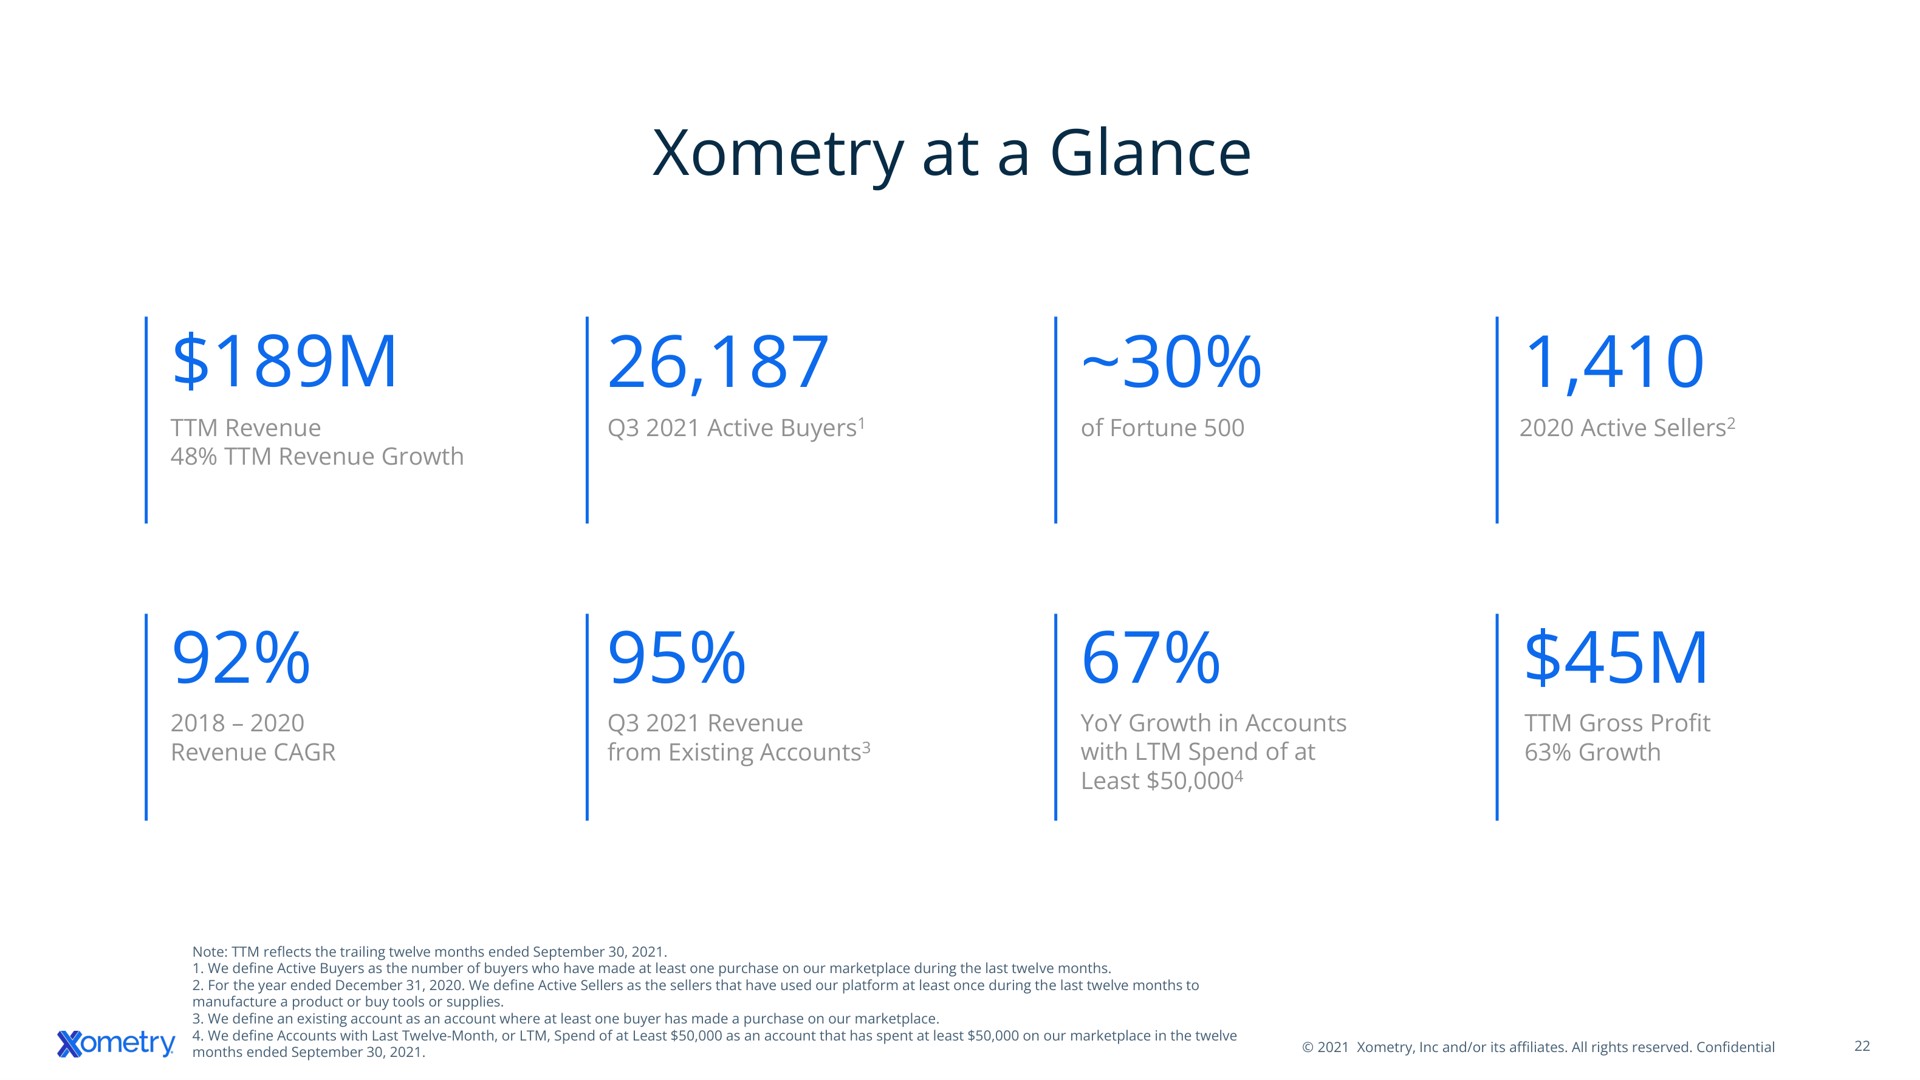 at a glance | Xometry